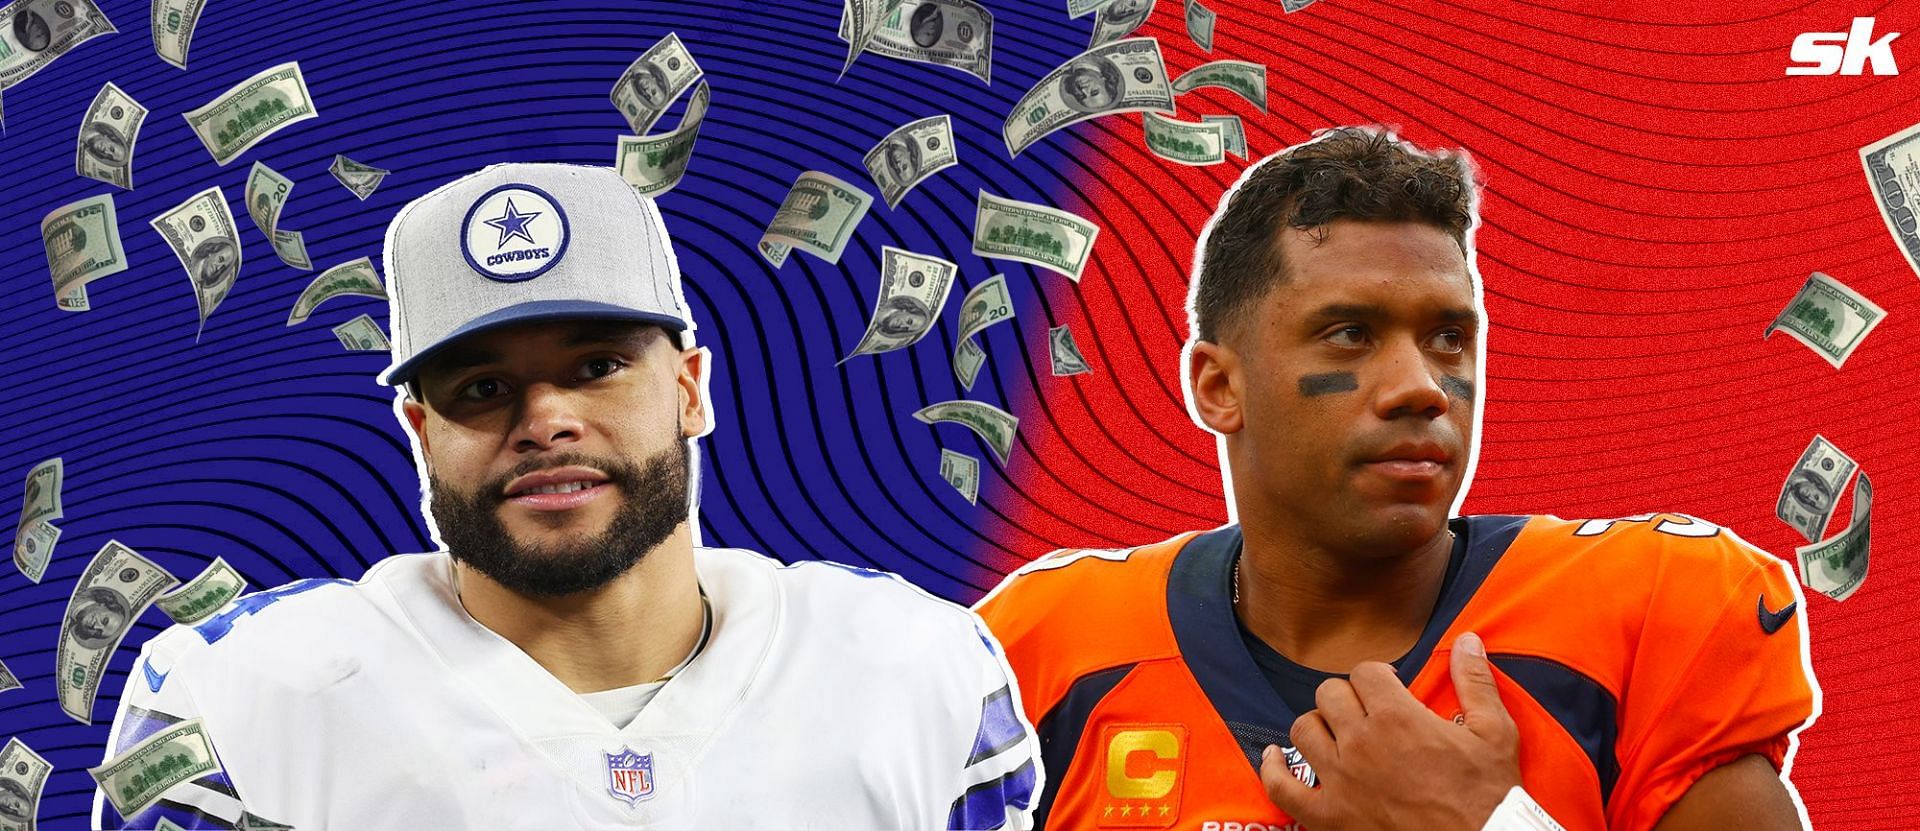 Mike Florio addresses scenario that could turn Dak Prescott cap woe into the next Russell Wilson in 2025